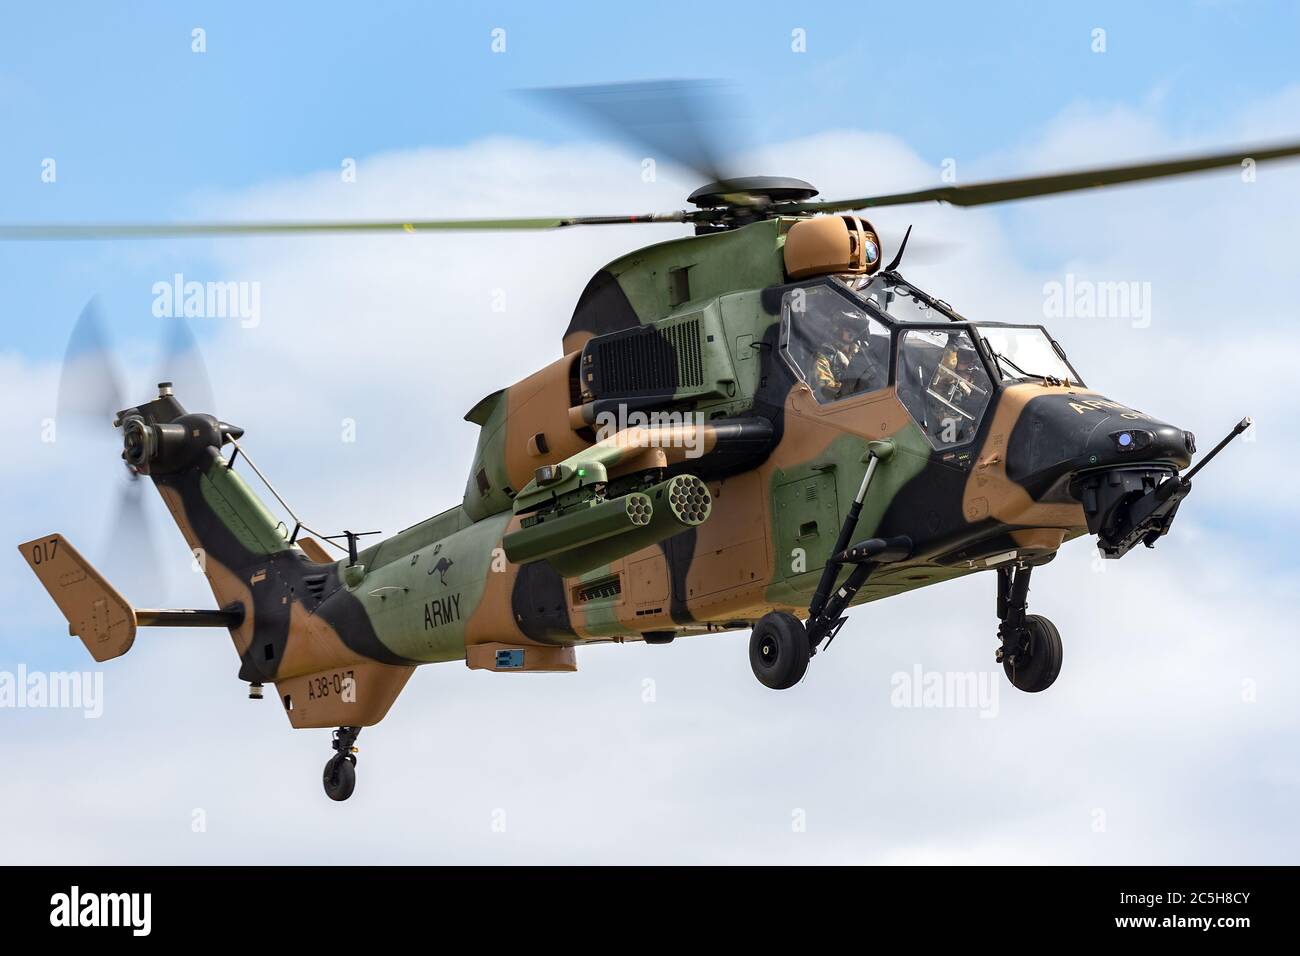 Australian Army Eurocopter Tiger ARH Armed reconnaissance helicopter. Stock Photo